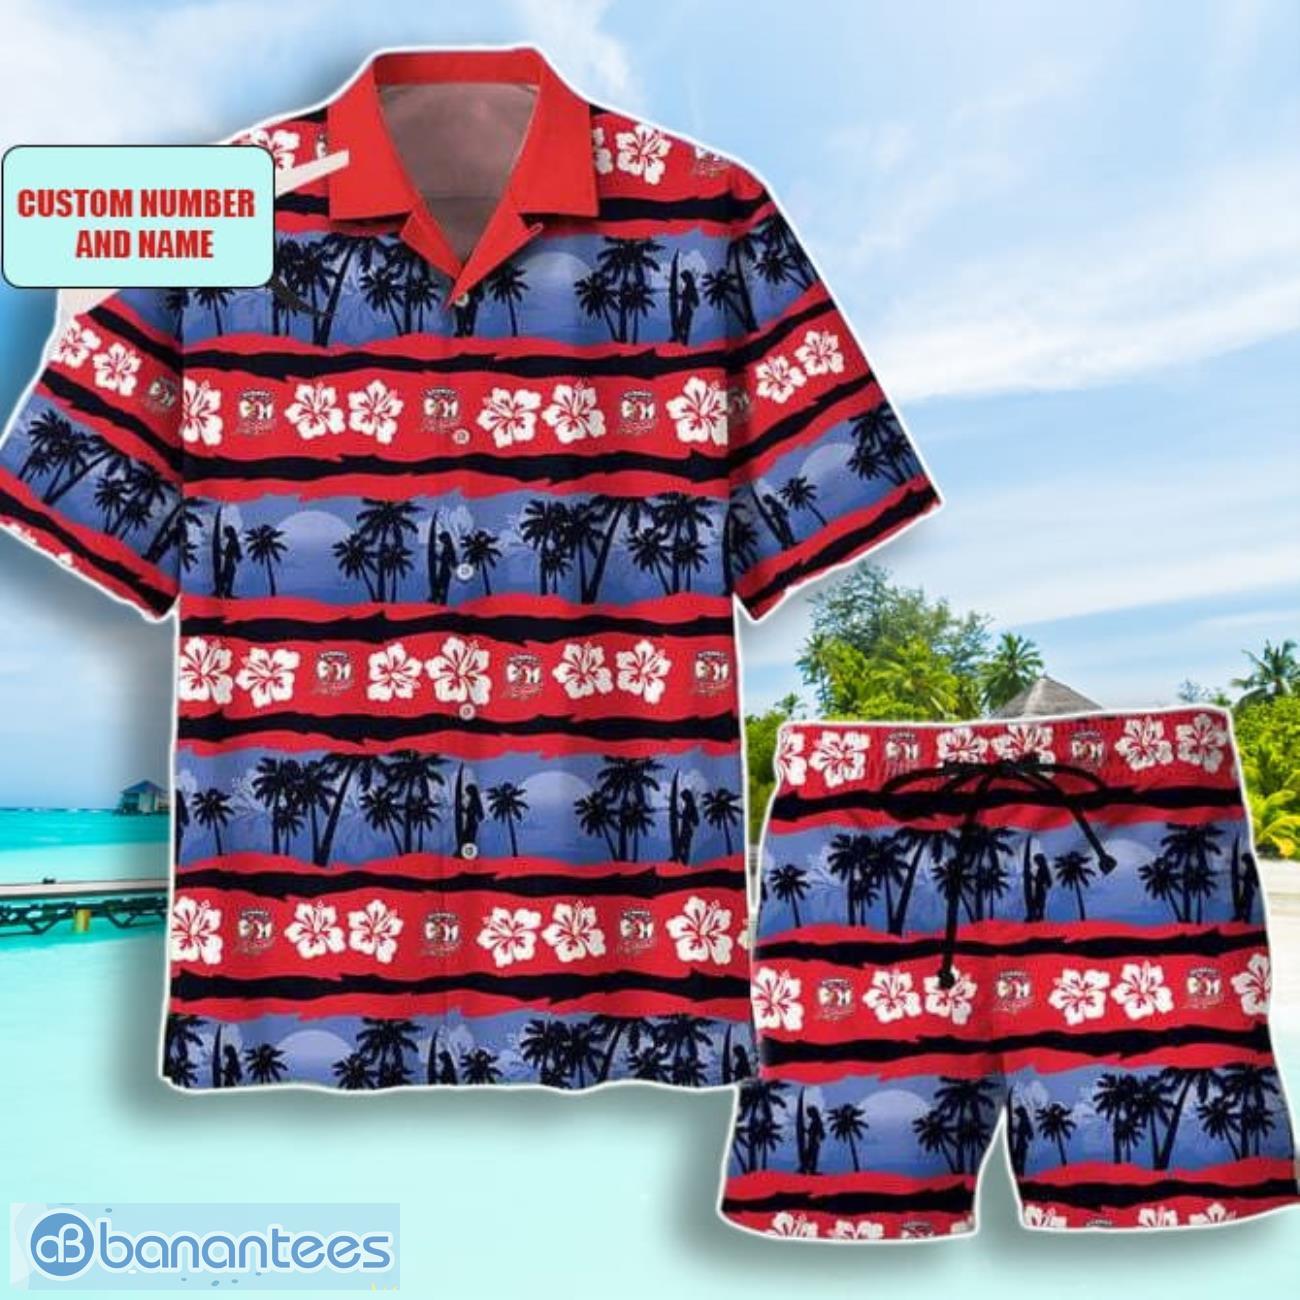 NRL Sydney Roosters Combo Hawaiian Shirt And Shorts Custom Number And Name Trendy Combo For Fans Product Photo 1